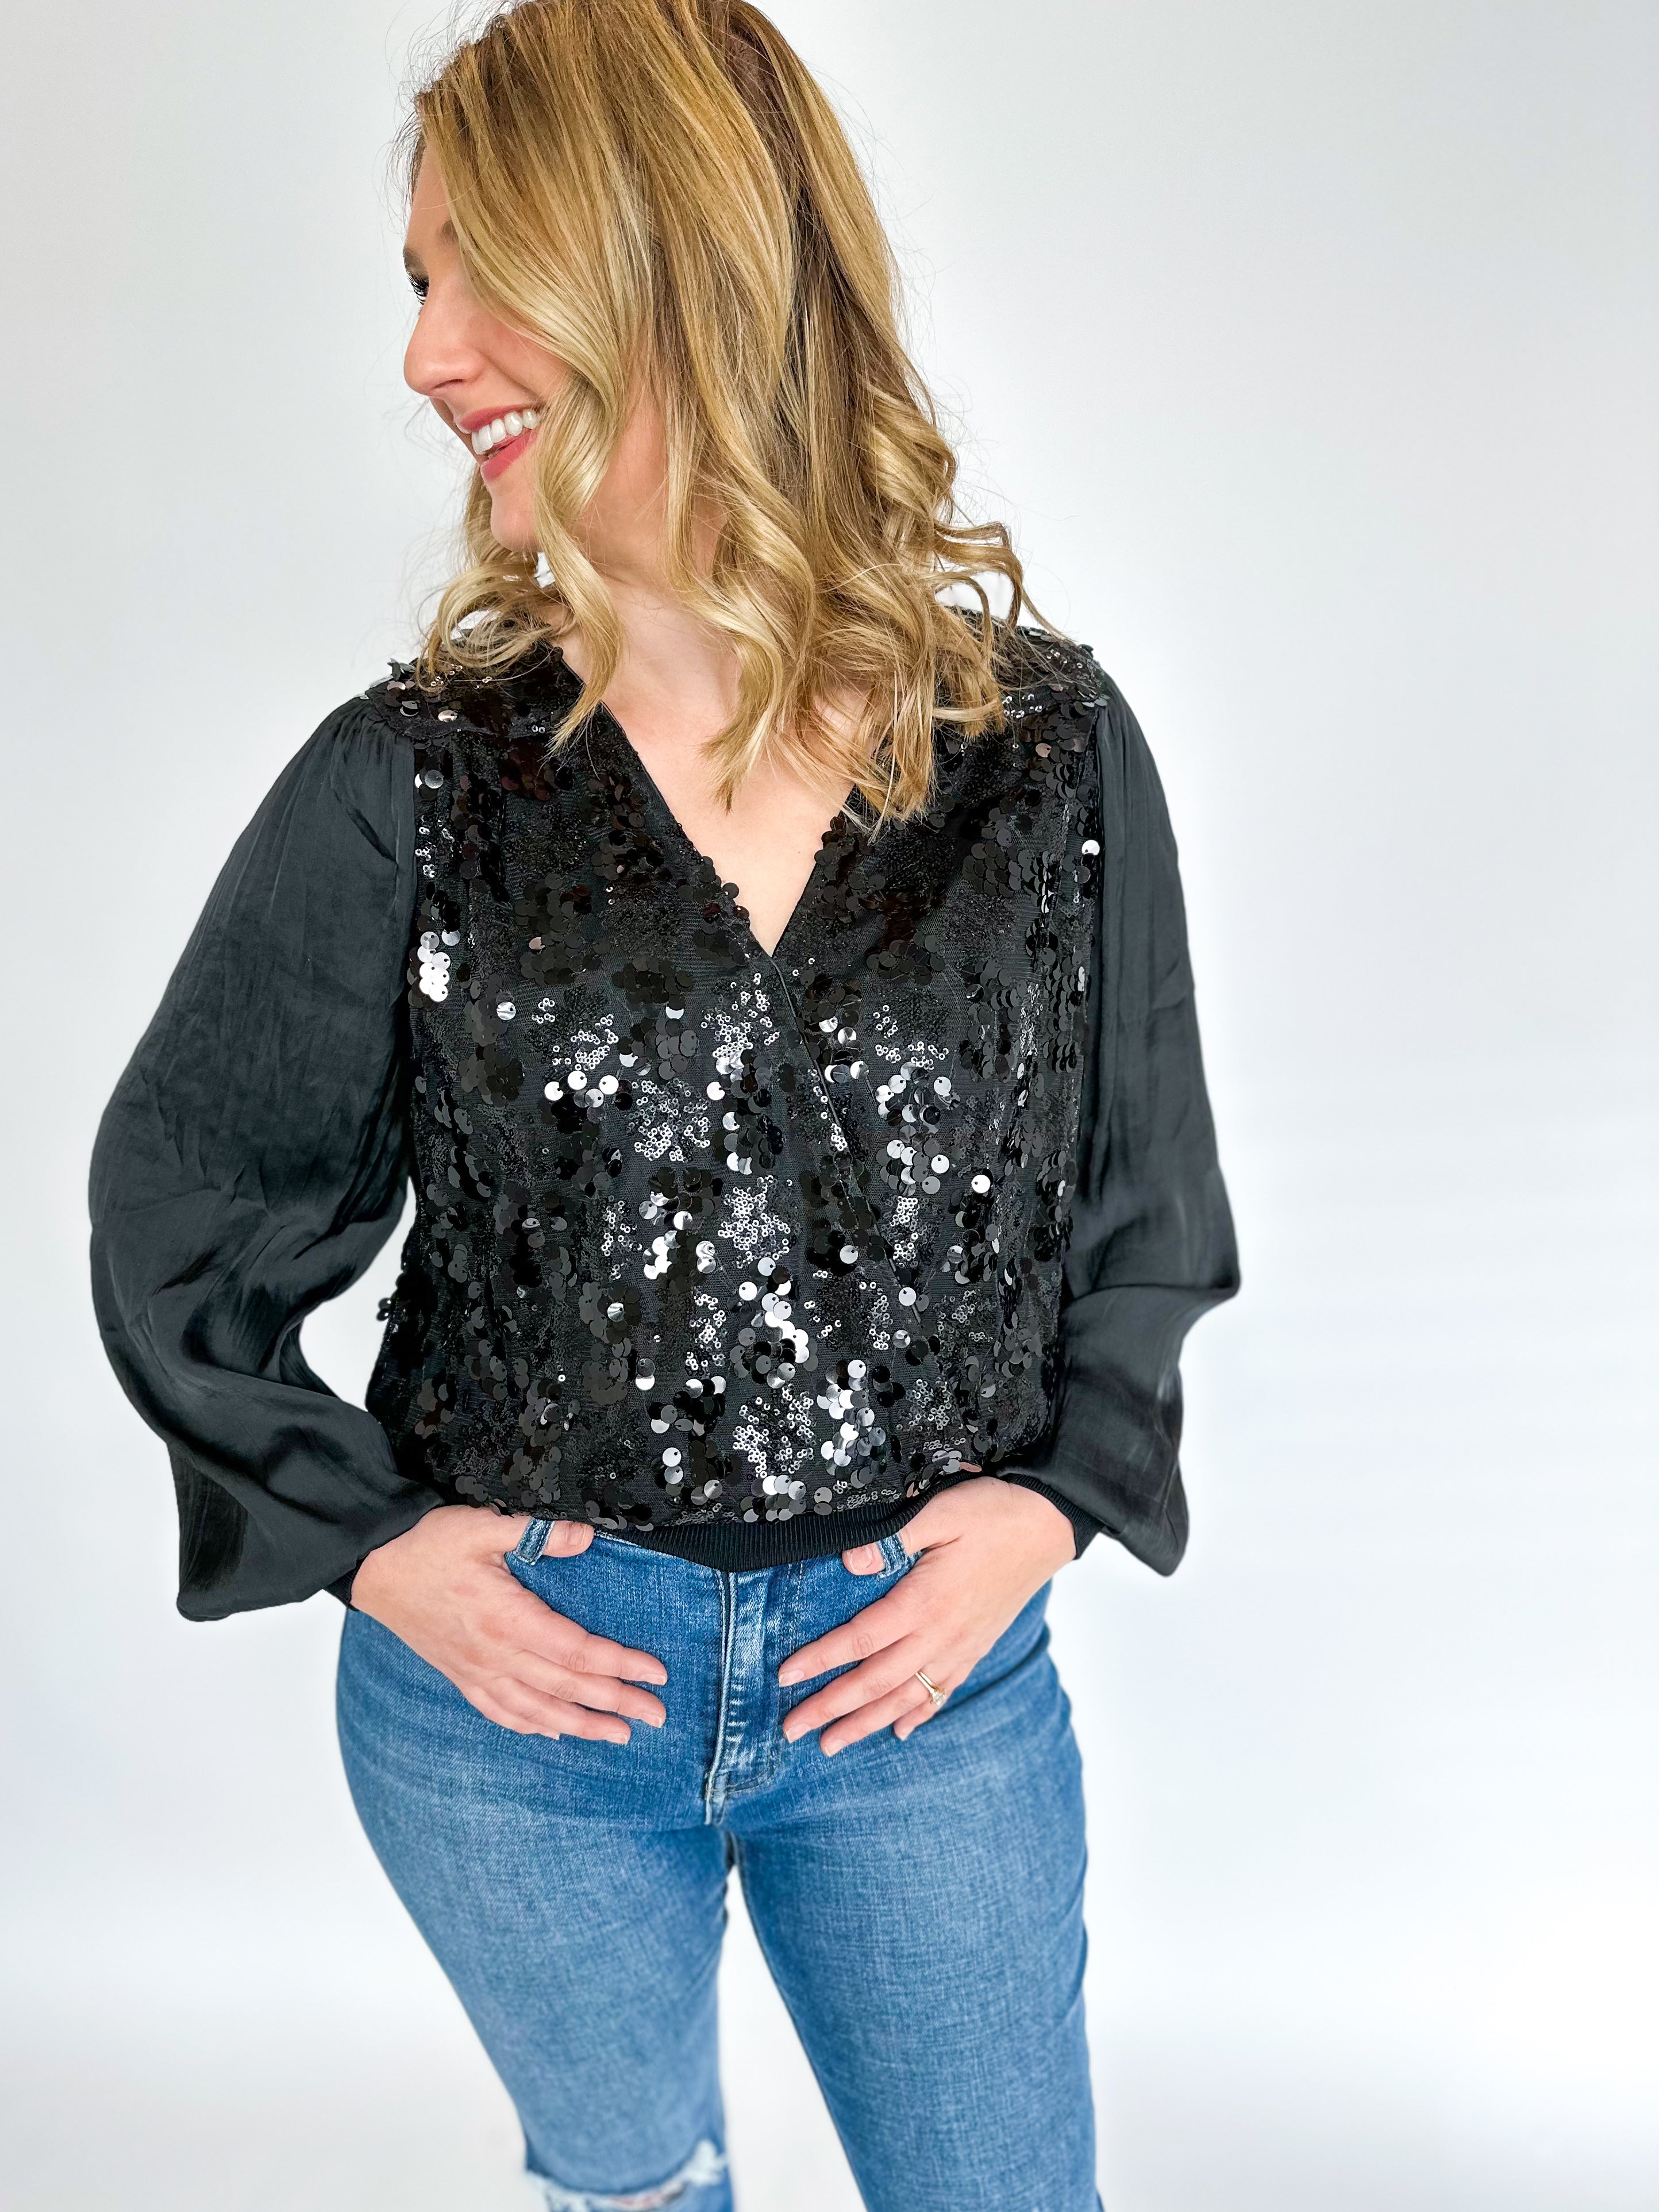 Life Of The Party Blouse-200 Fashion Blouses-CURRENT AIR CLOTHING-July & June Women's Fashion Boutique Located in San Antonio, Texas